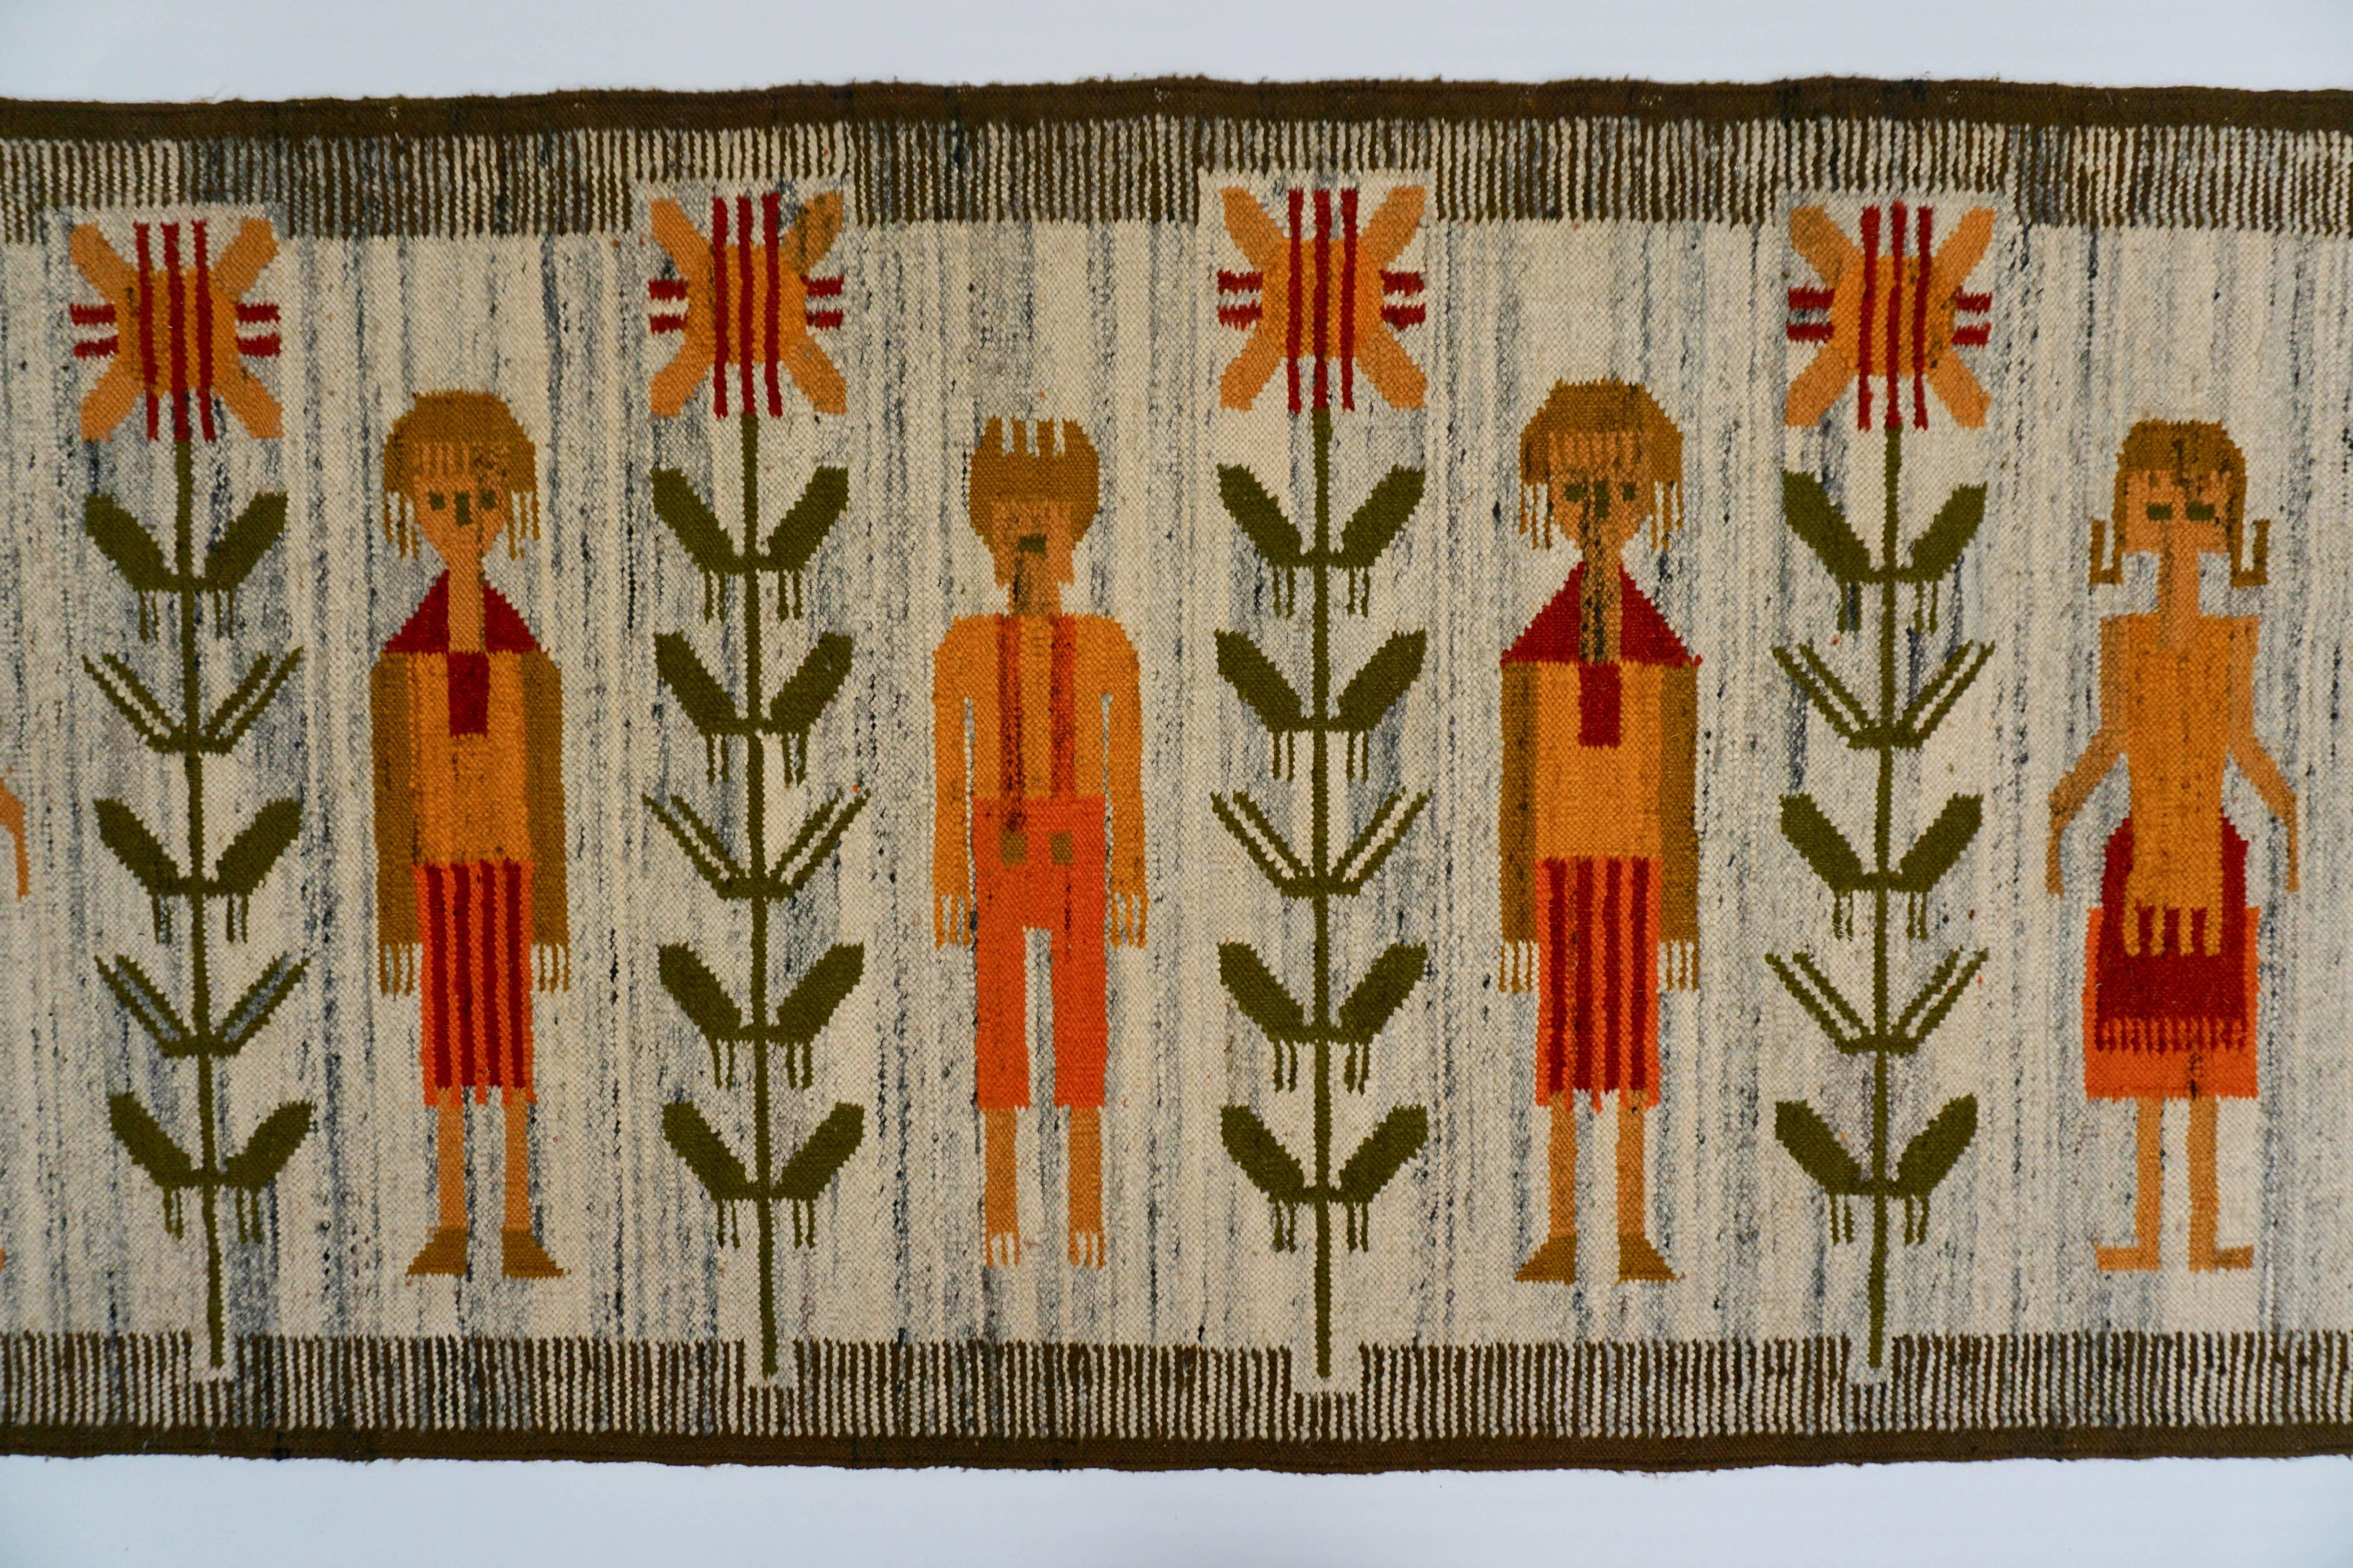 Tapestry from Poland.
Measures: Width 202 cm.